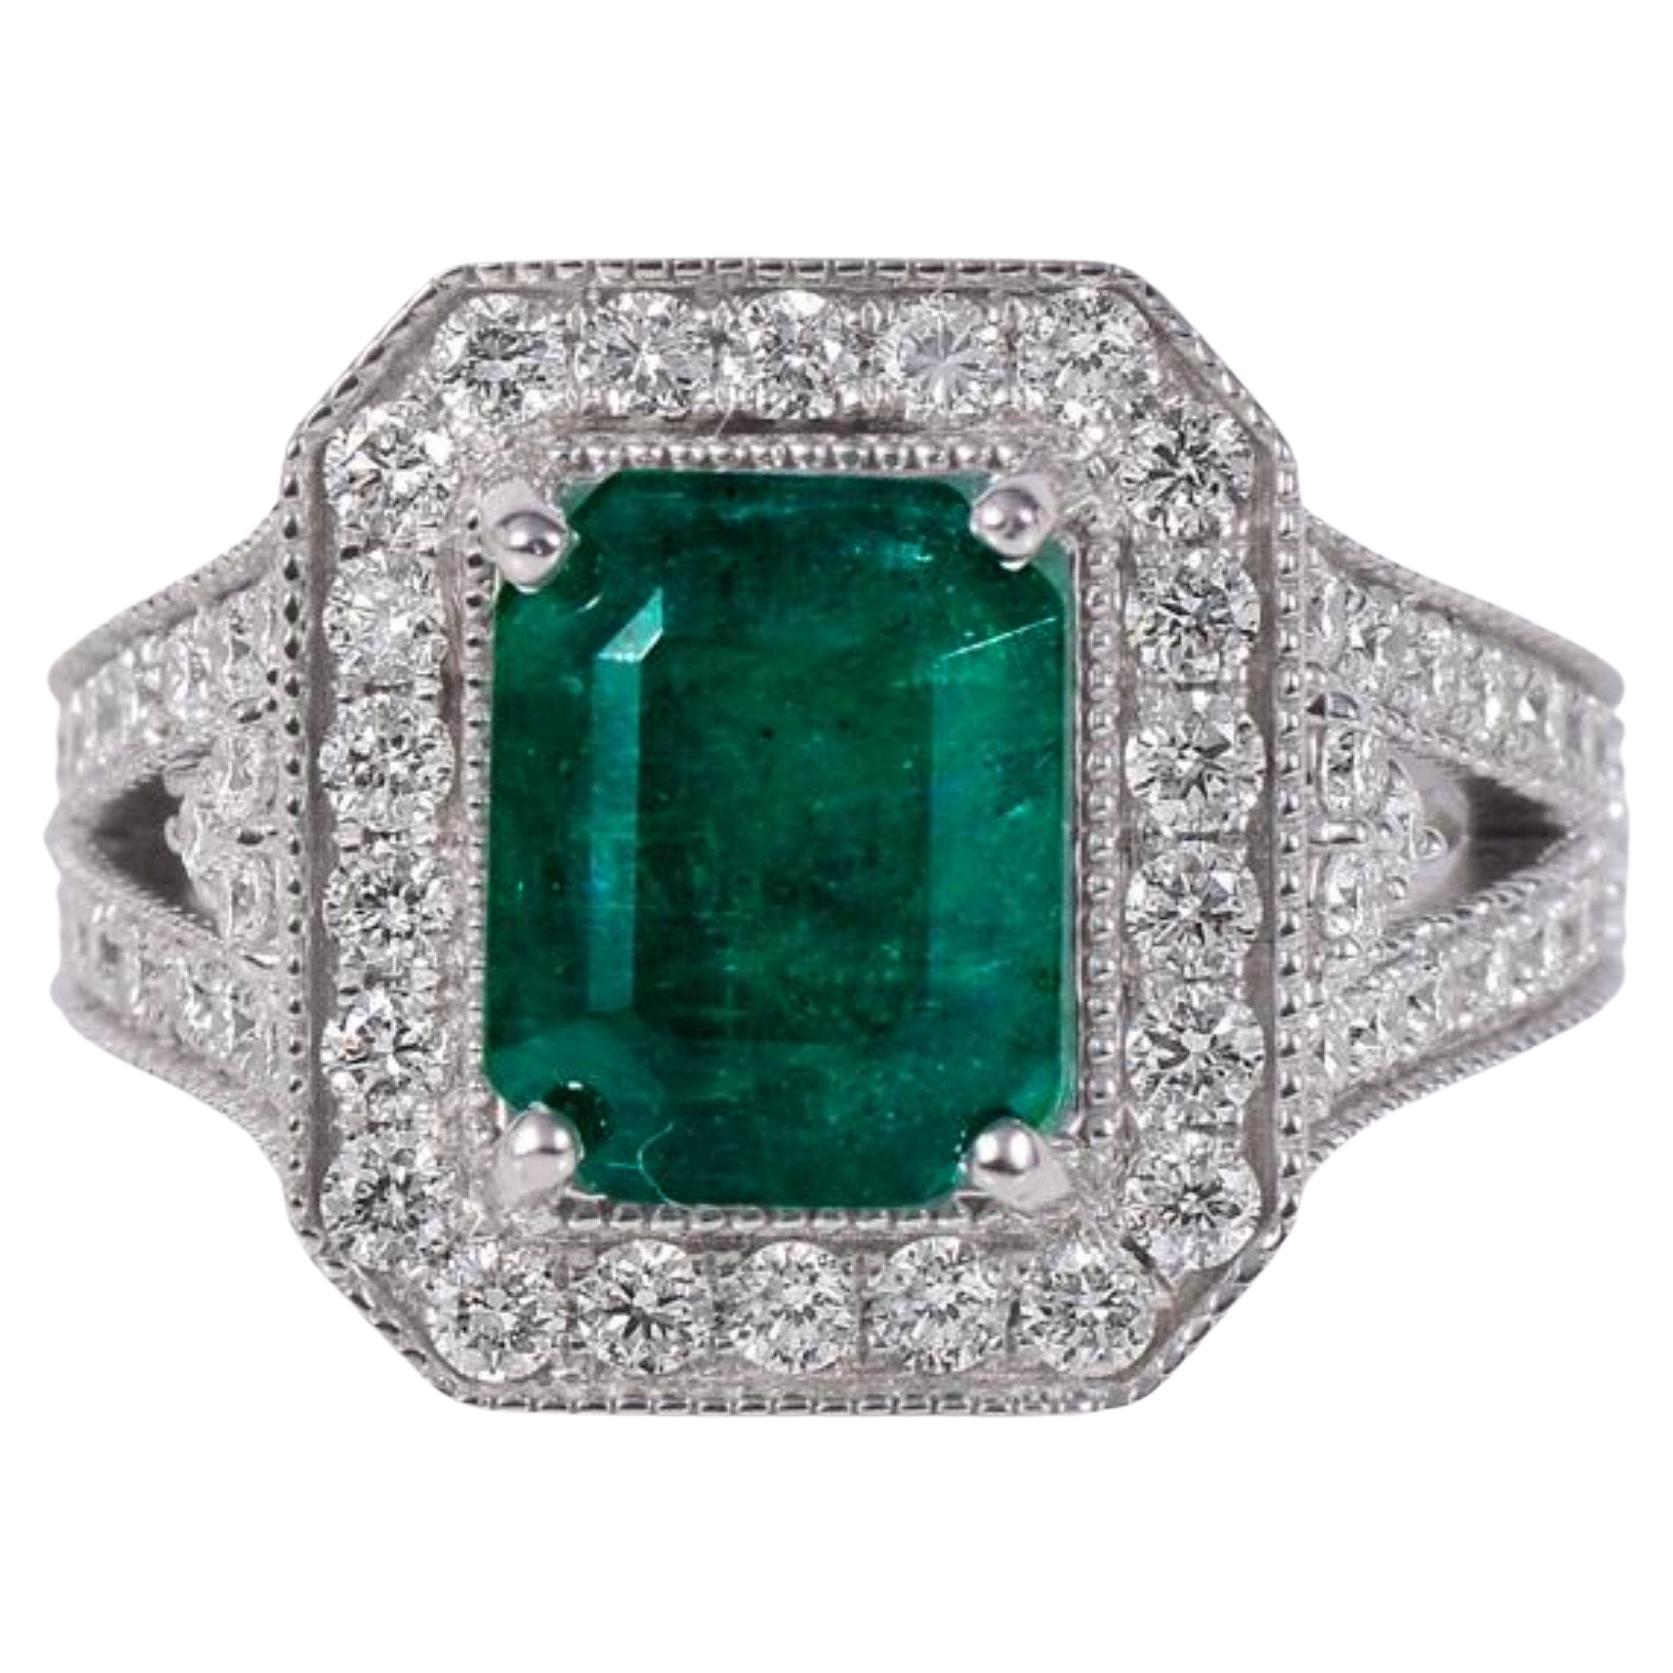 For Sale:  Art Deco 3.01 Carat Emerald and Diamond White Gold Engagement Ring Wedding Ring